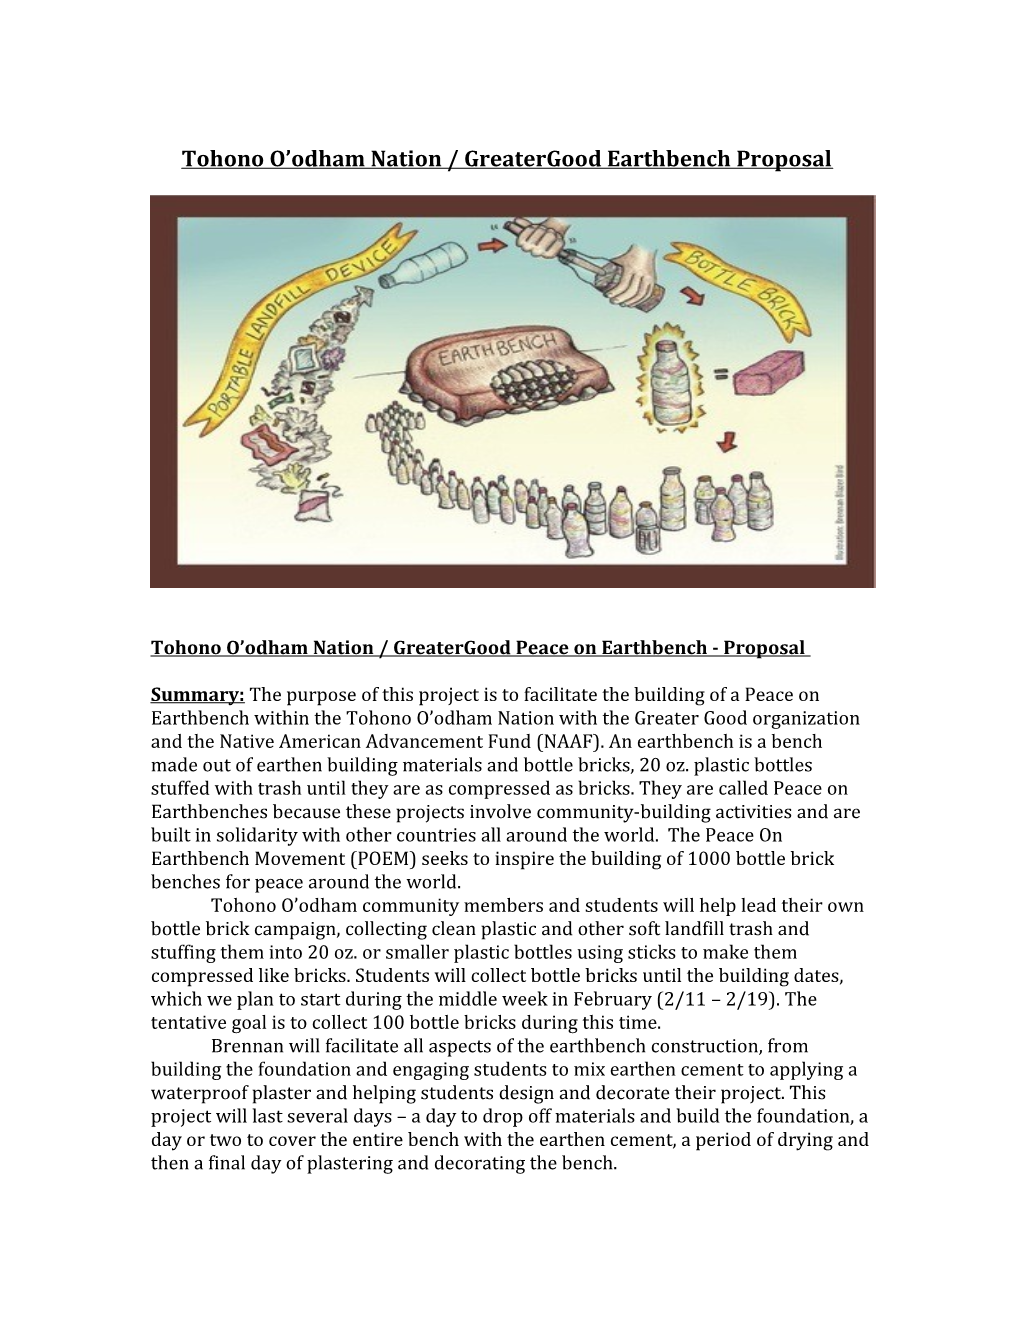 Tohono O Odham Nation/ Greatergood Peace on Earthbench - Proposal